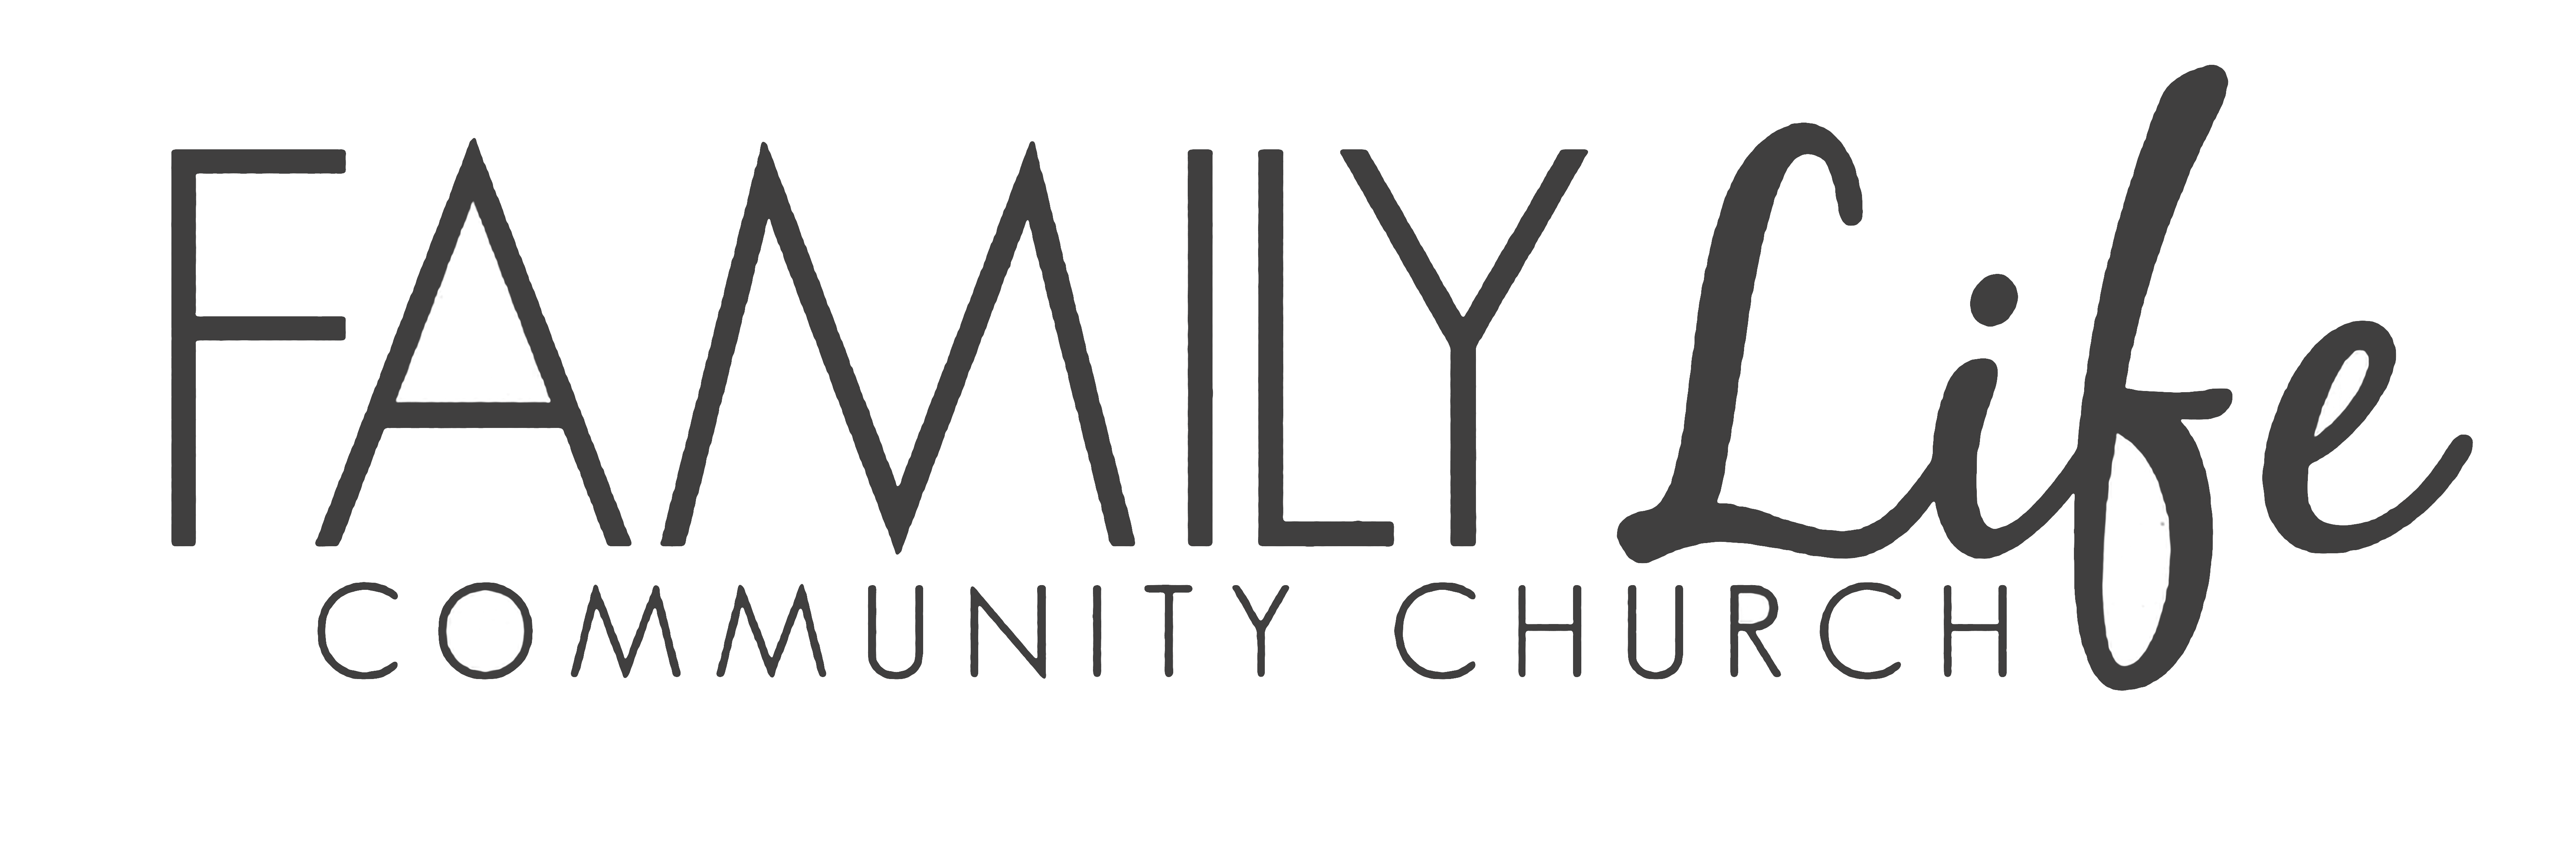 Church Family Images | Free download on ClipArtMag